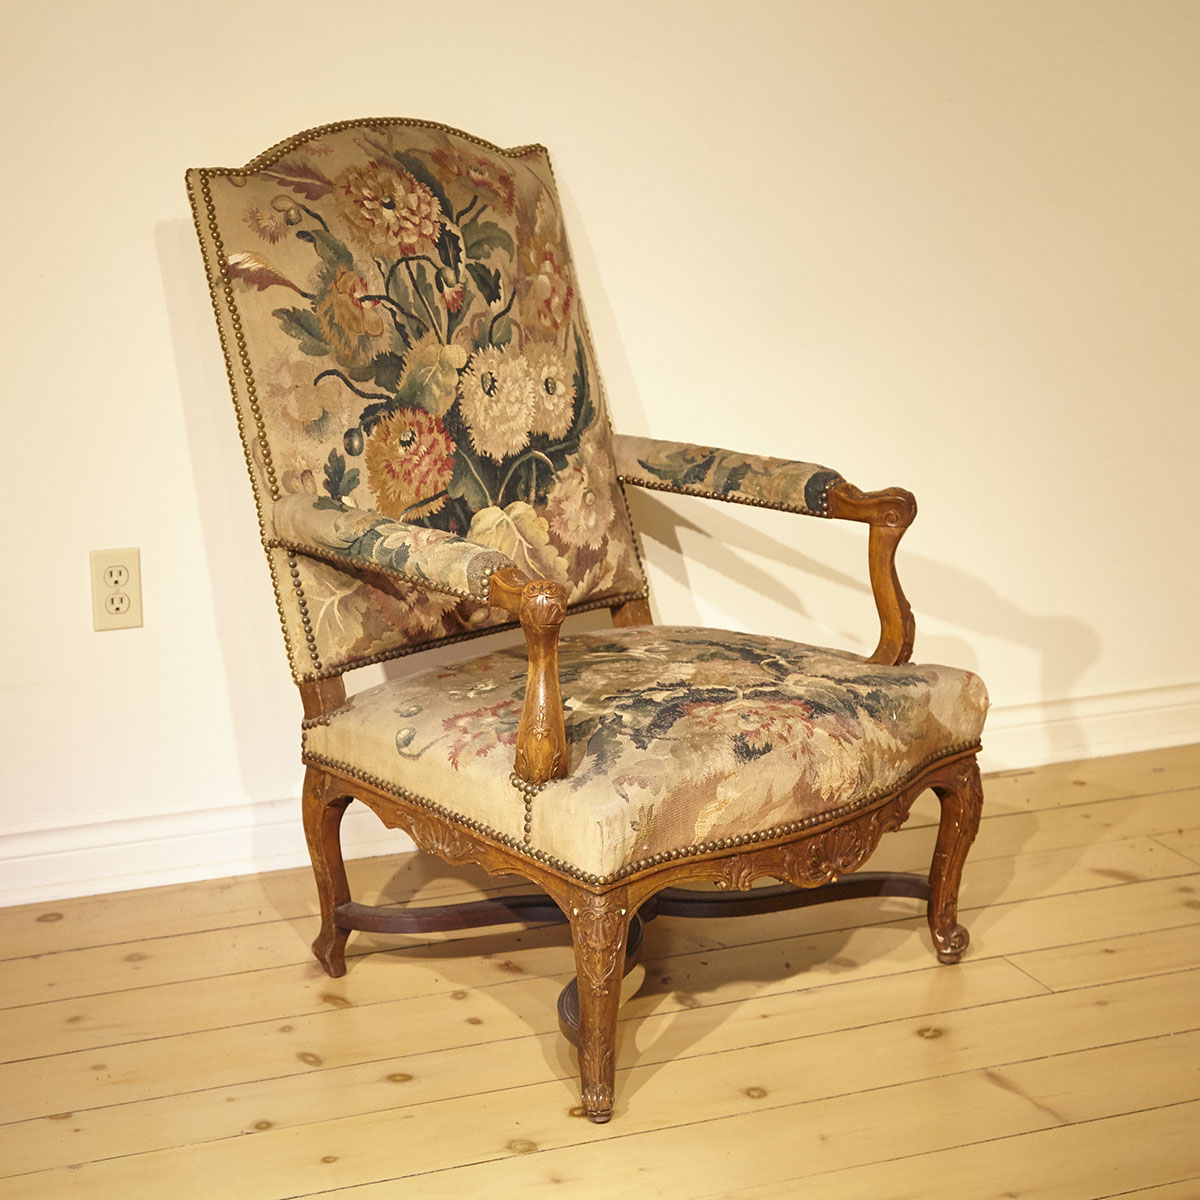 Louis XV Style Walnut Fauteuil, early 18th century